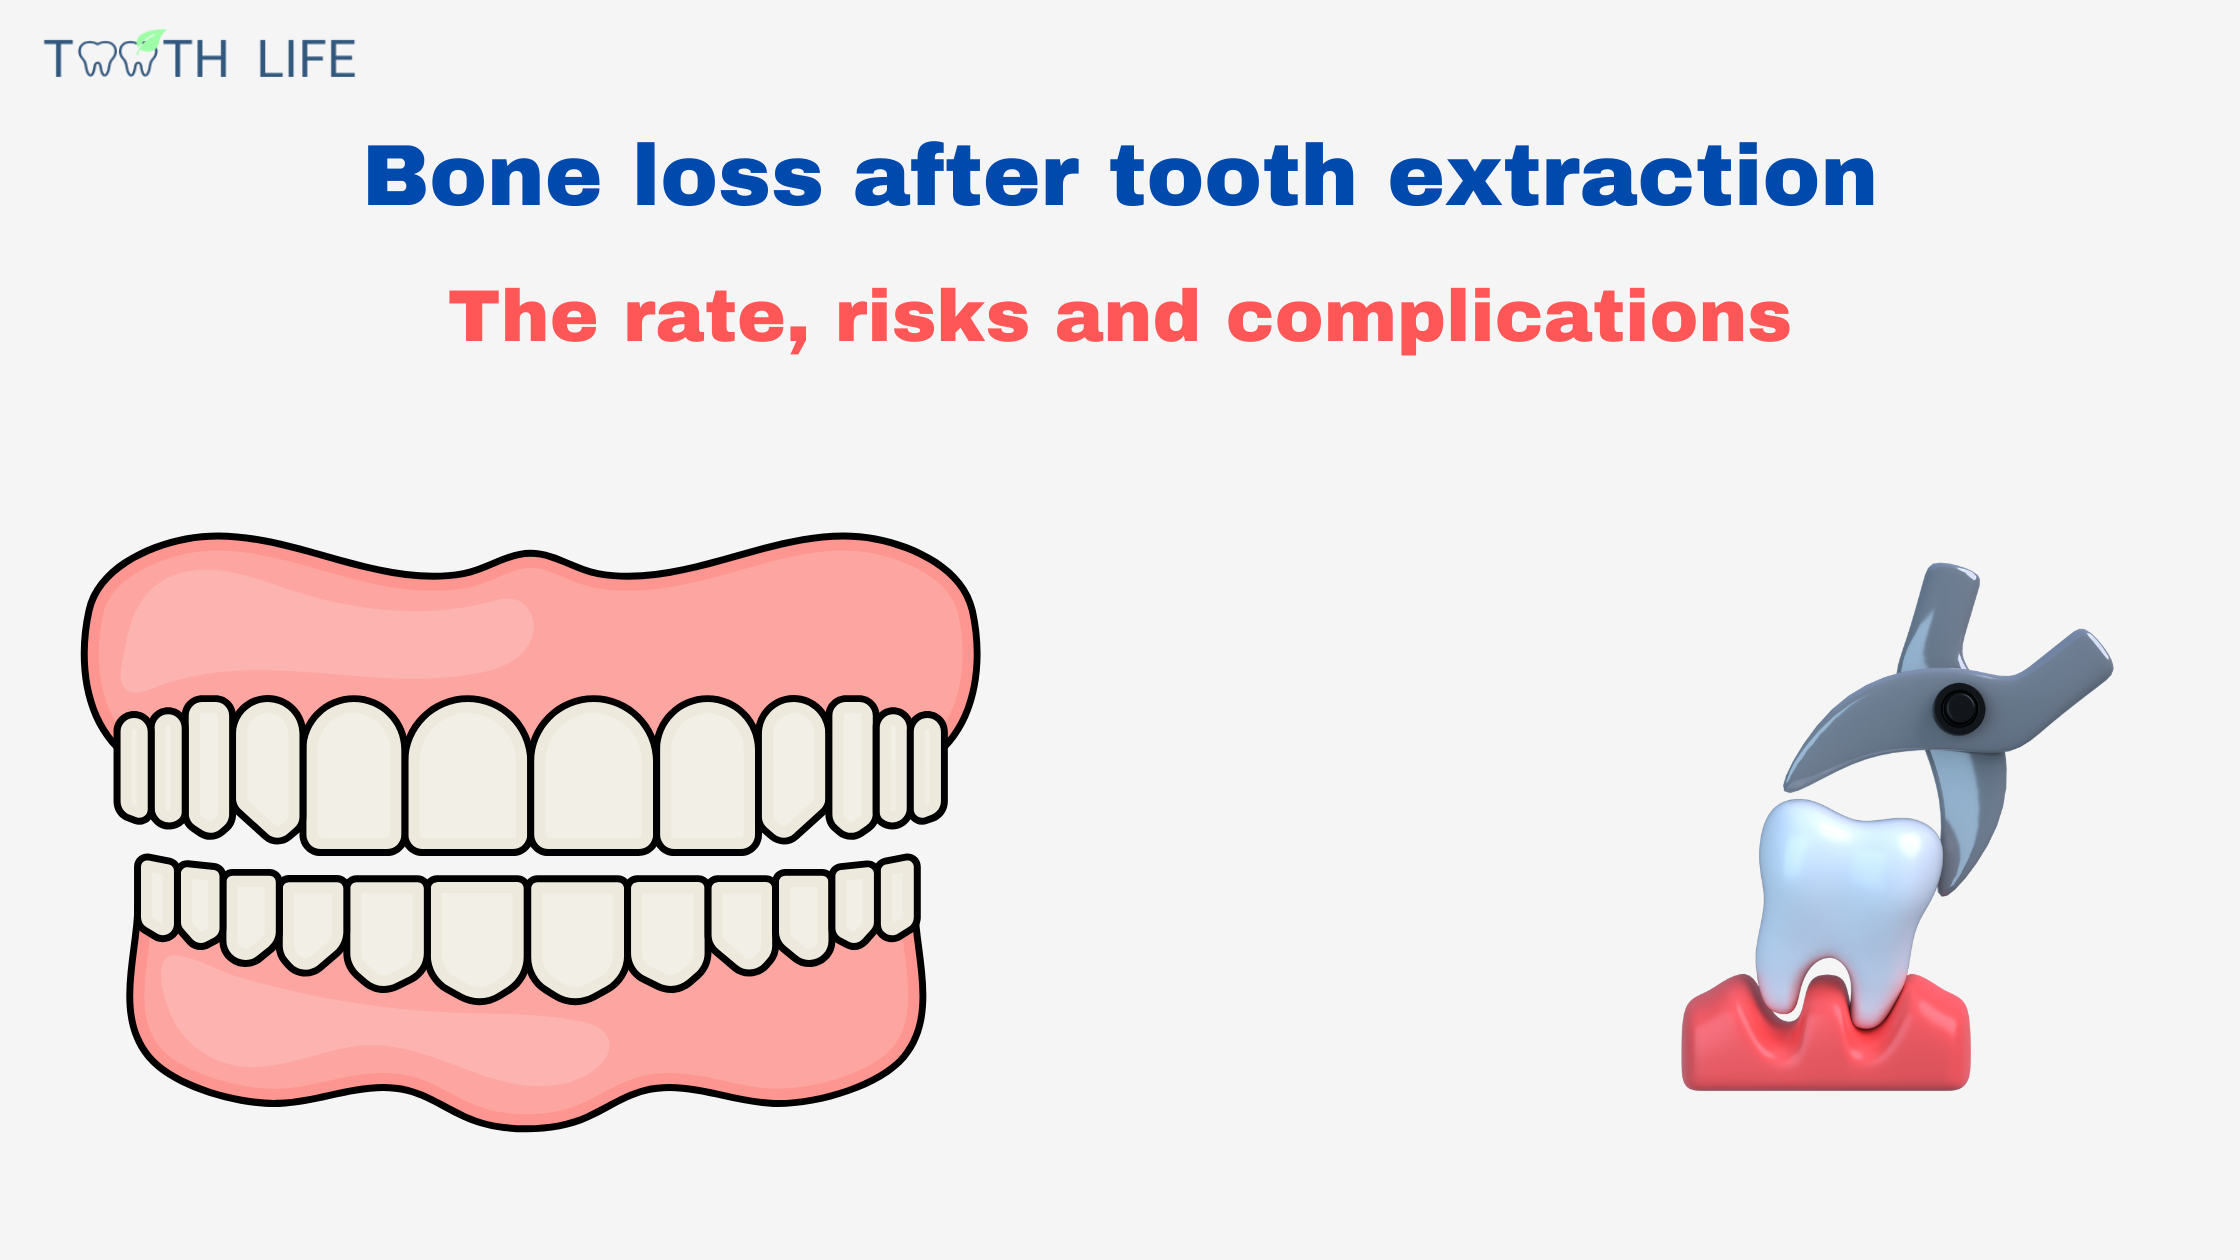 Bone loss after tooth extraction